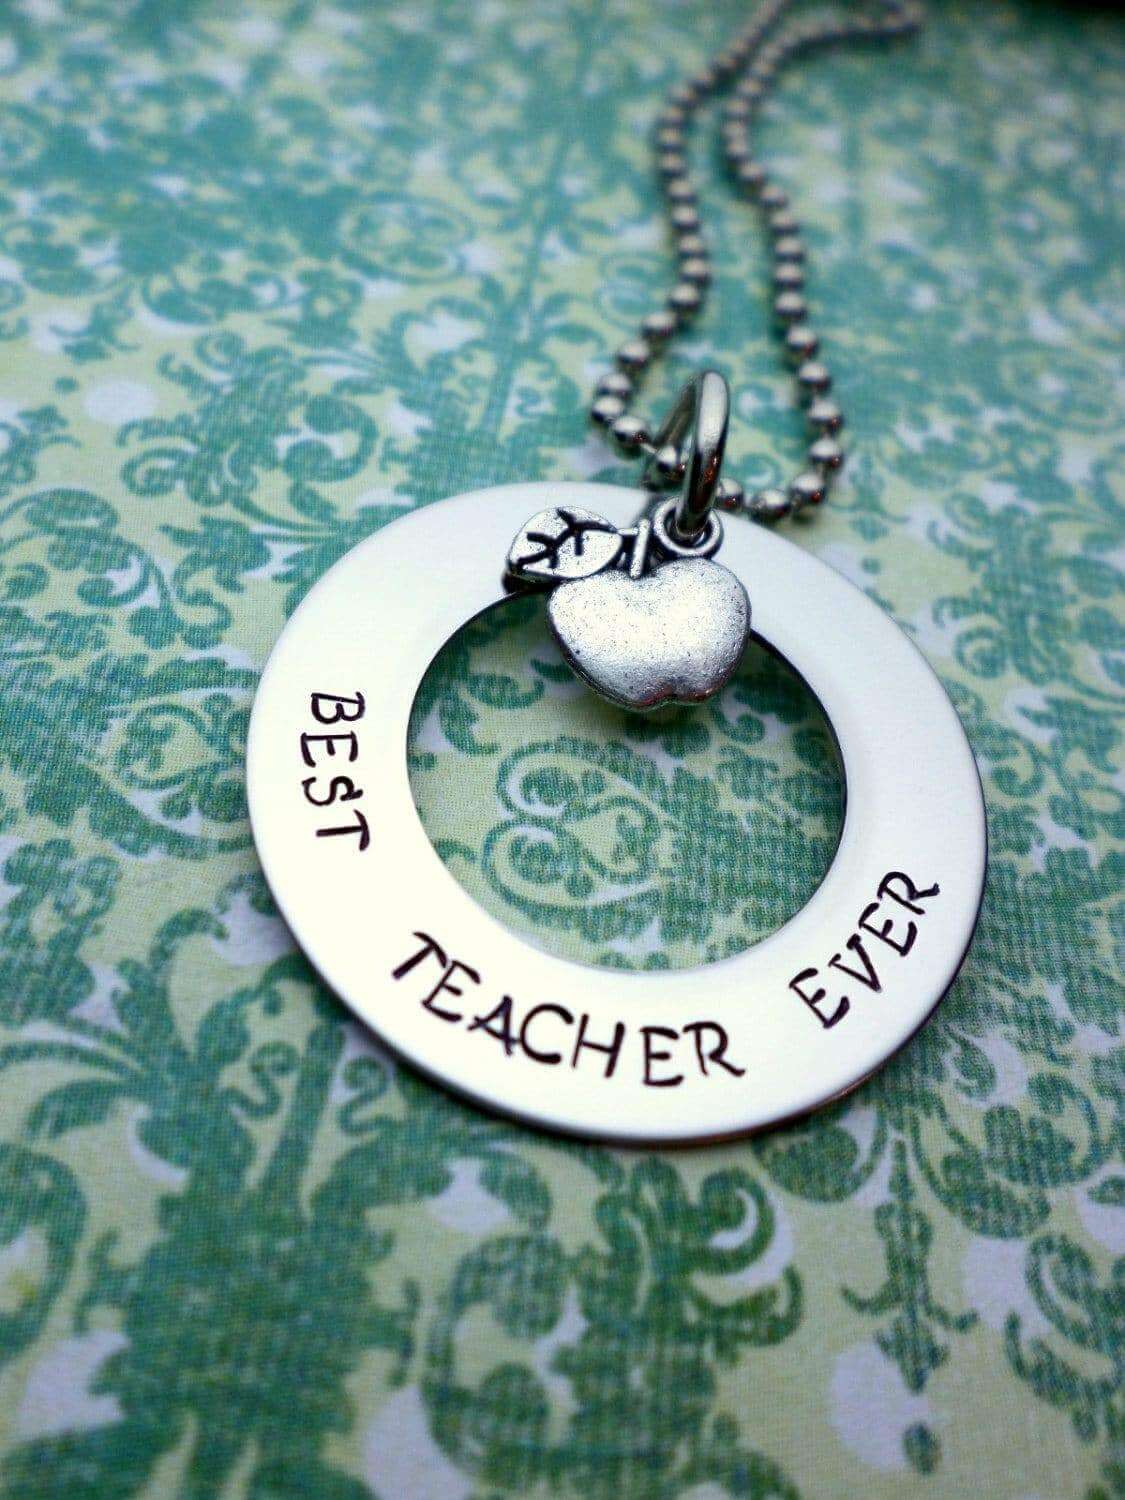 Teacher Gift, End of Year Gift, #1 Teacher, School Teacher, Son's Teacher, Daughter's Teacher, Necklaces, HandmadeLoveStories, HandmadeLoveStories , [Handmade_Love_Stories], [Hand_Stamped_Jewelry], [Etsy_Stamped_Jewelry], [Etsy_Jewelry]